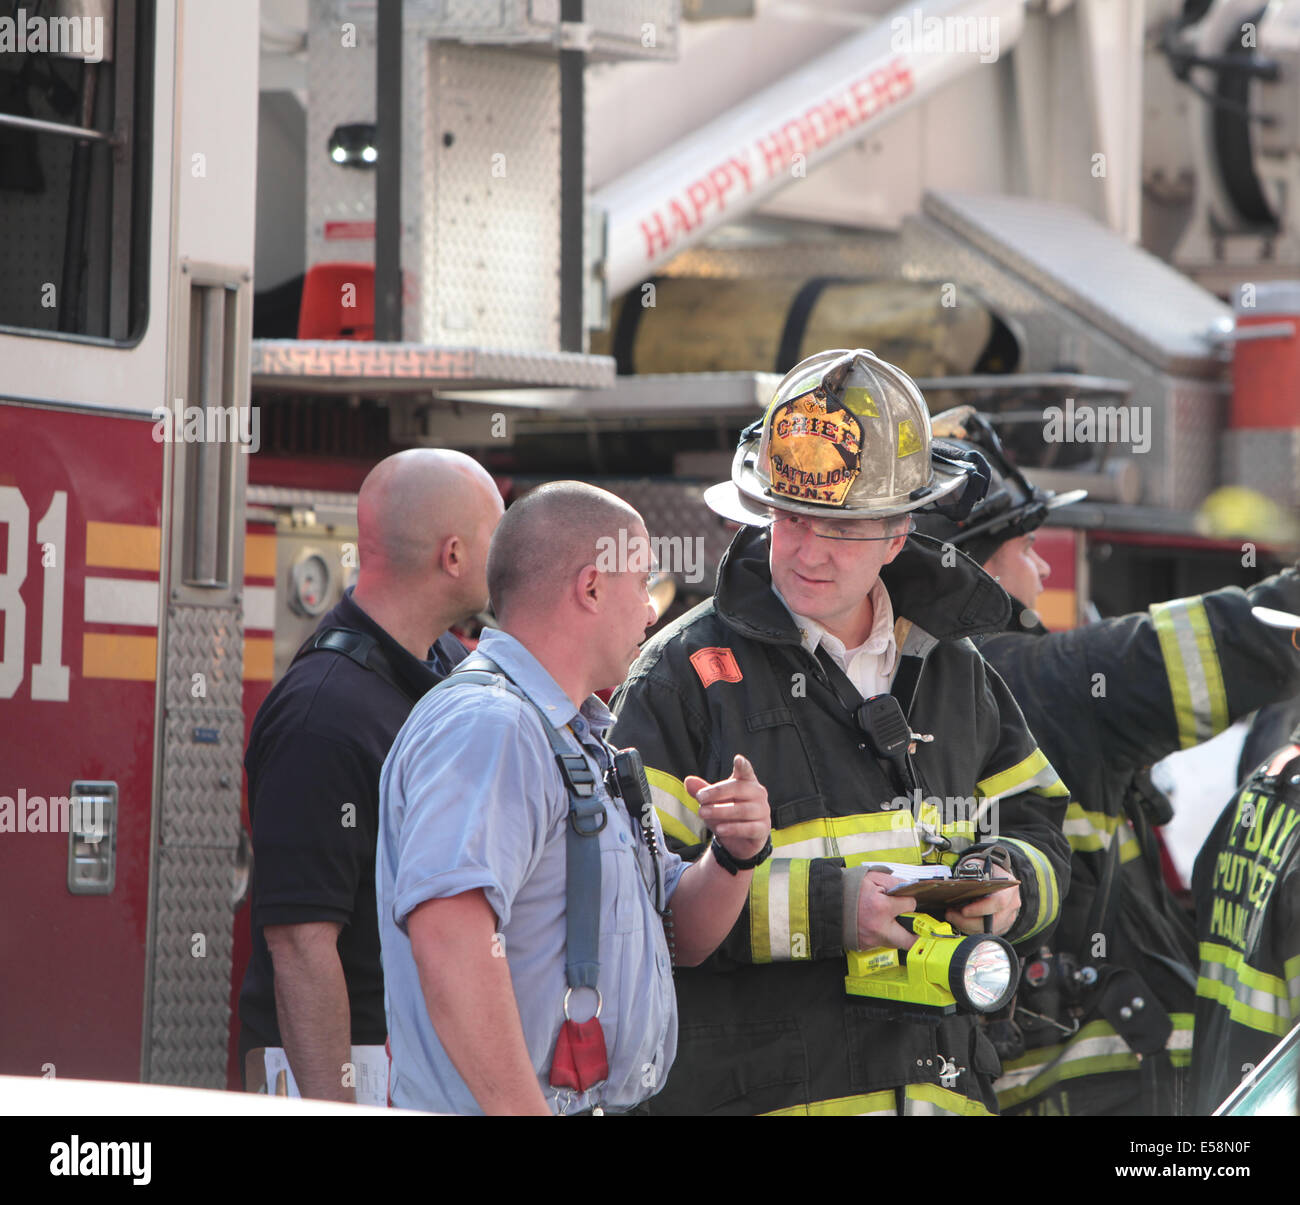 FDNY chief confers with other fire officials on scene of residential fire in Brooklyn neighborhood of Gowanus in daylight Stock Photo